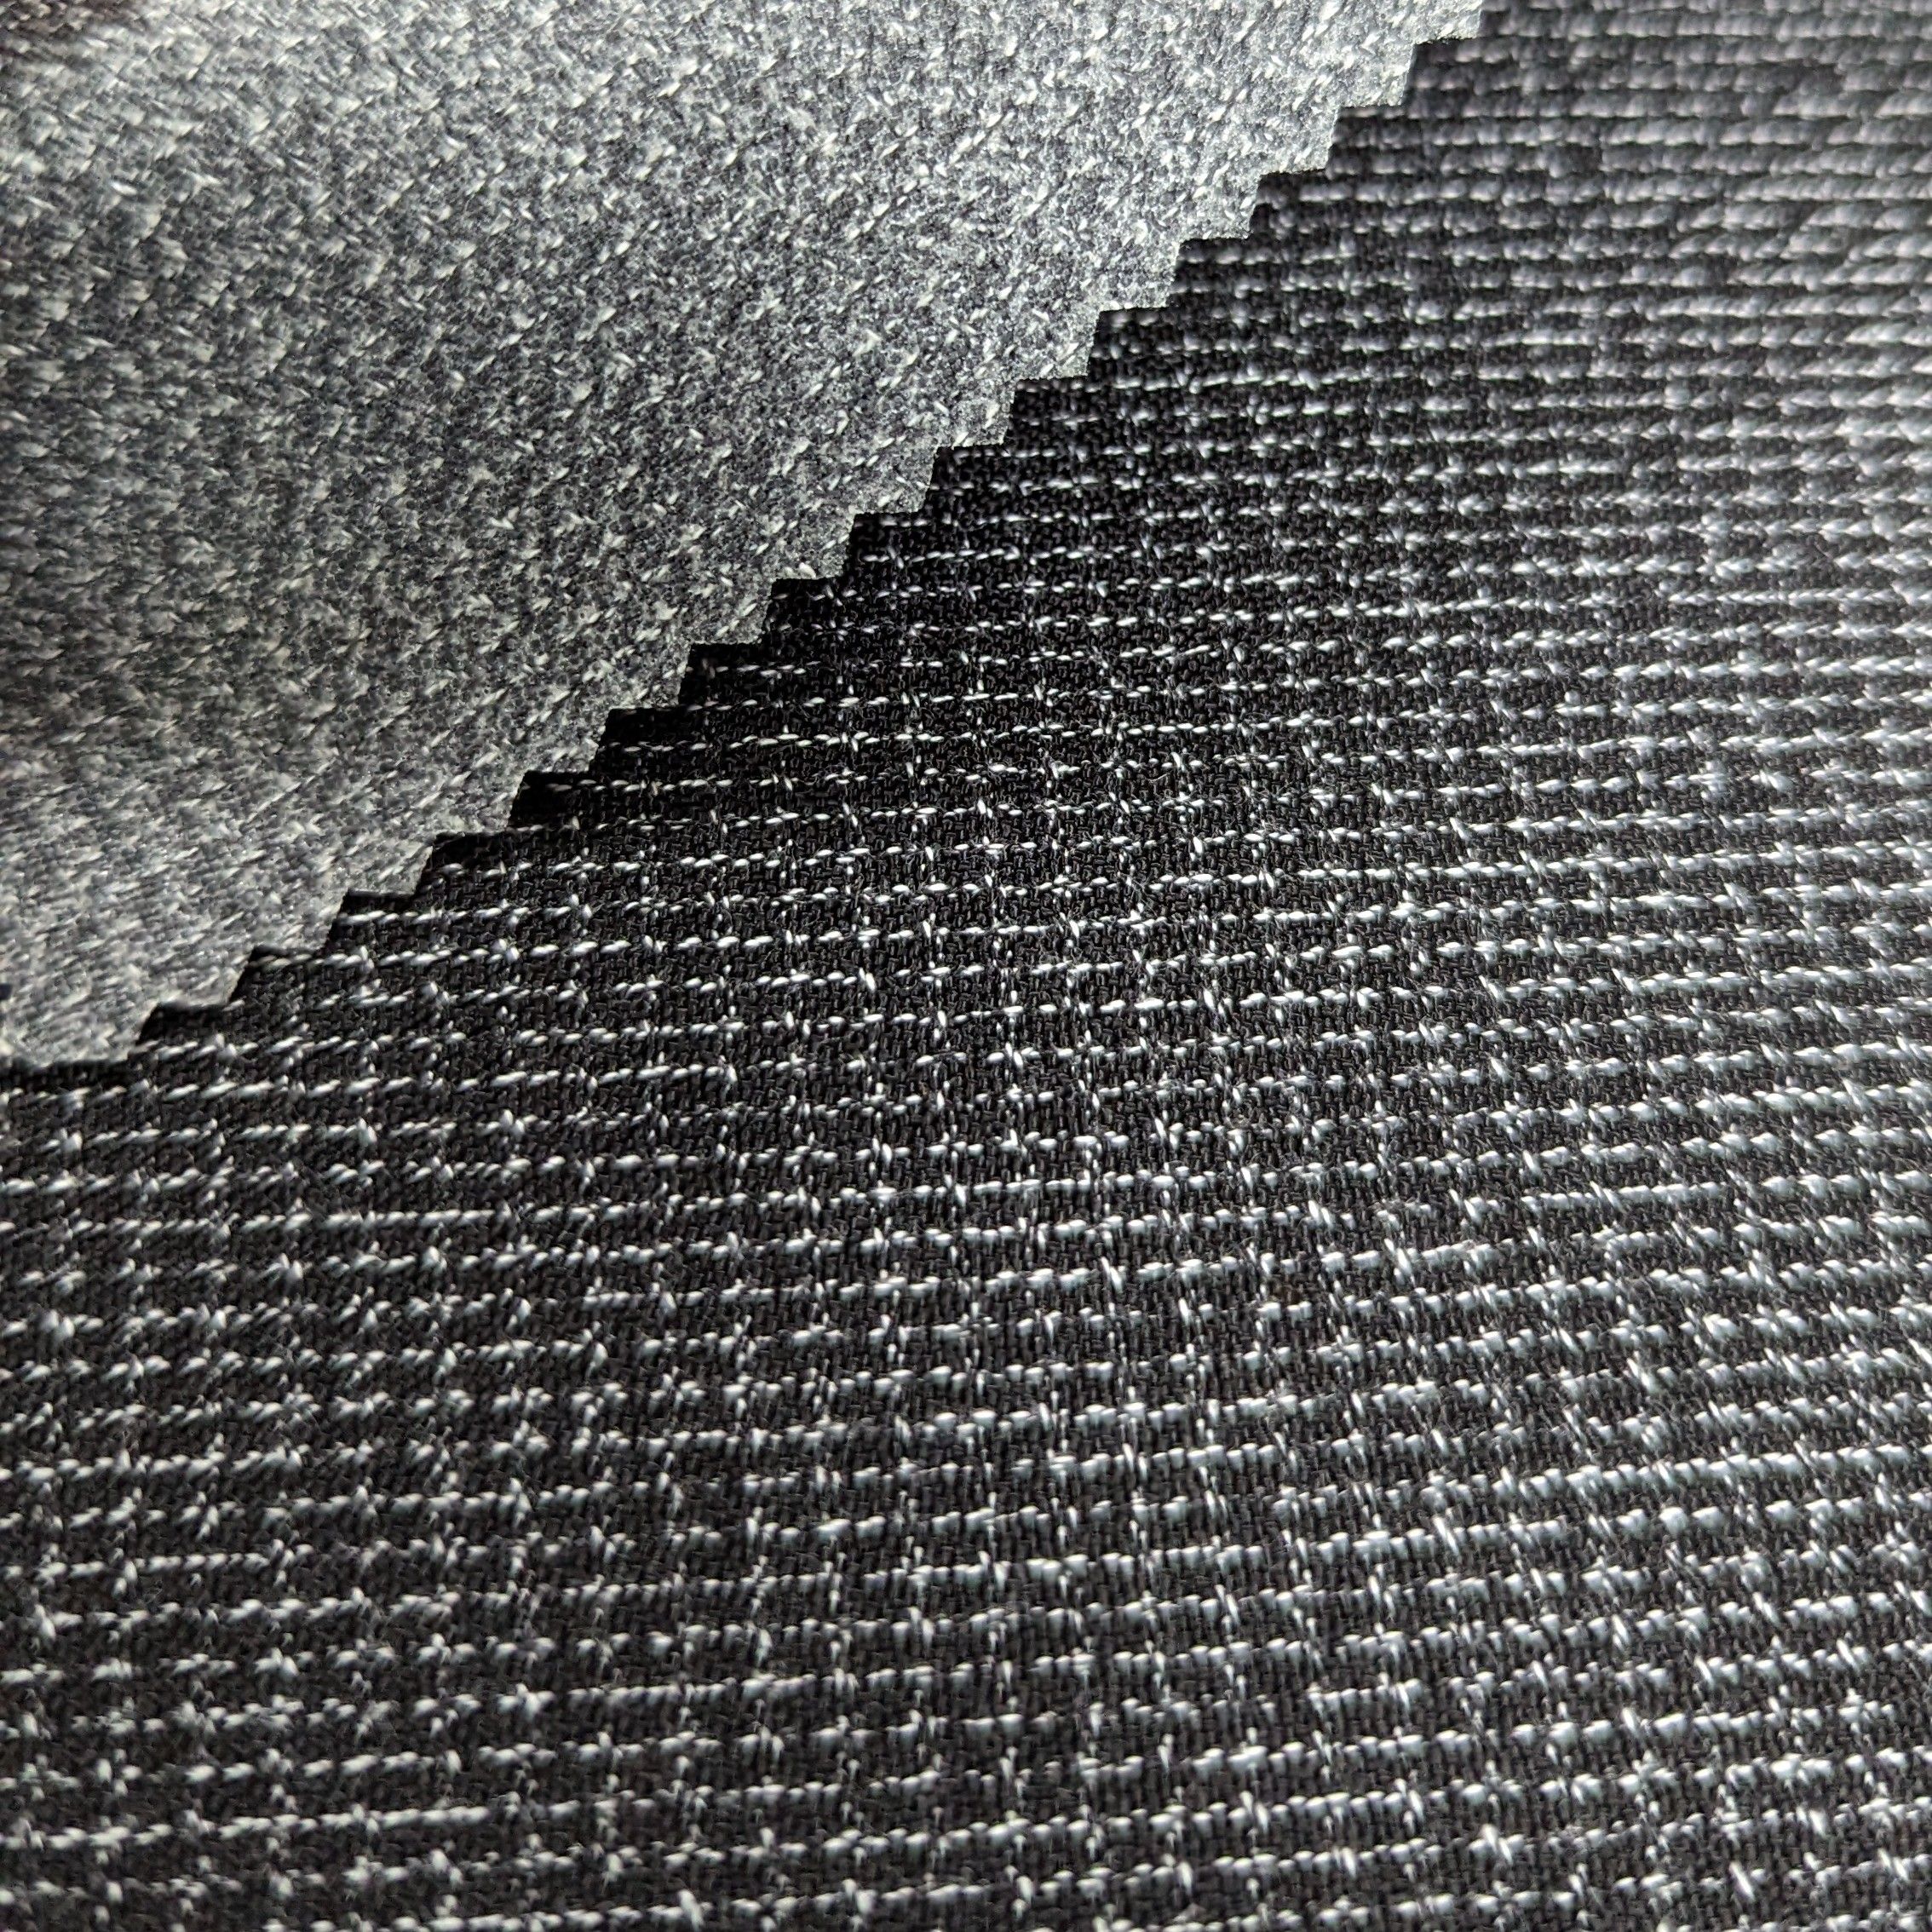 Fire Resistant Fabric,Anti Flame Fabric Cloth, Fireproof